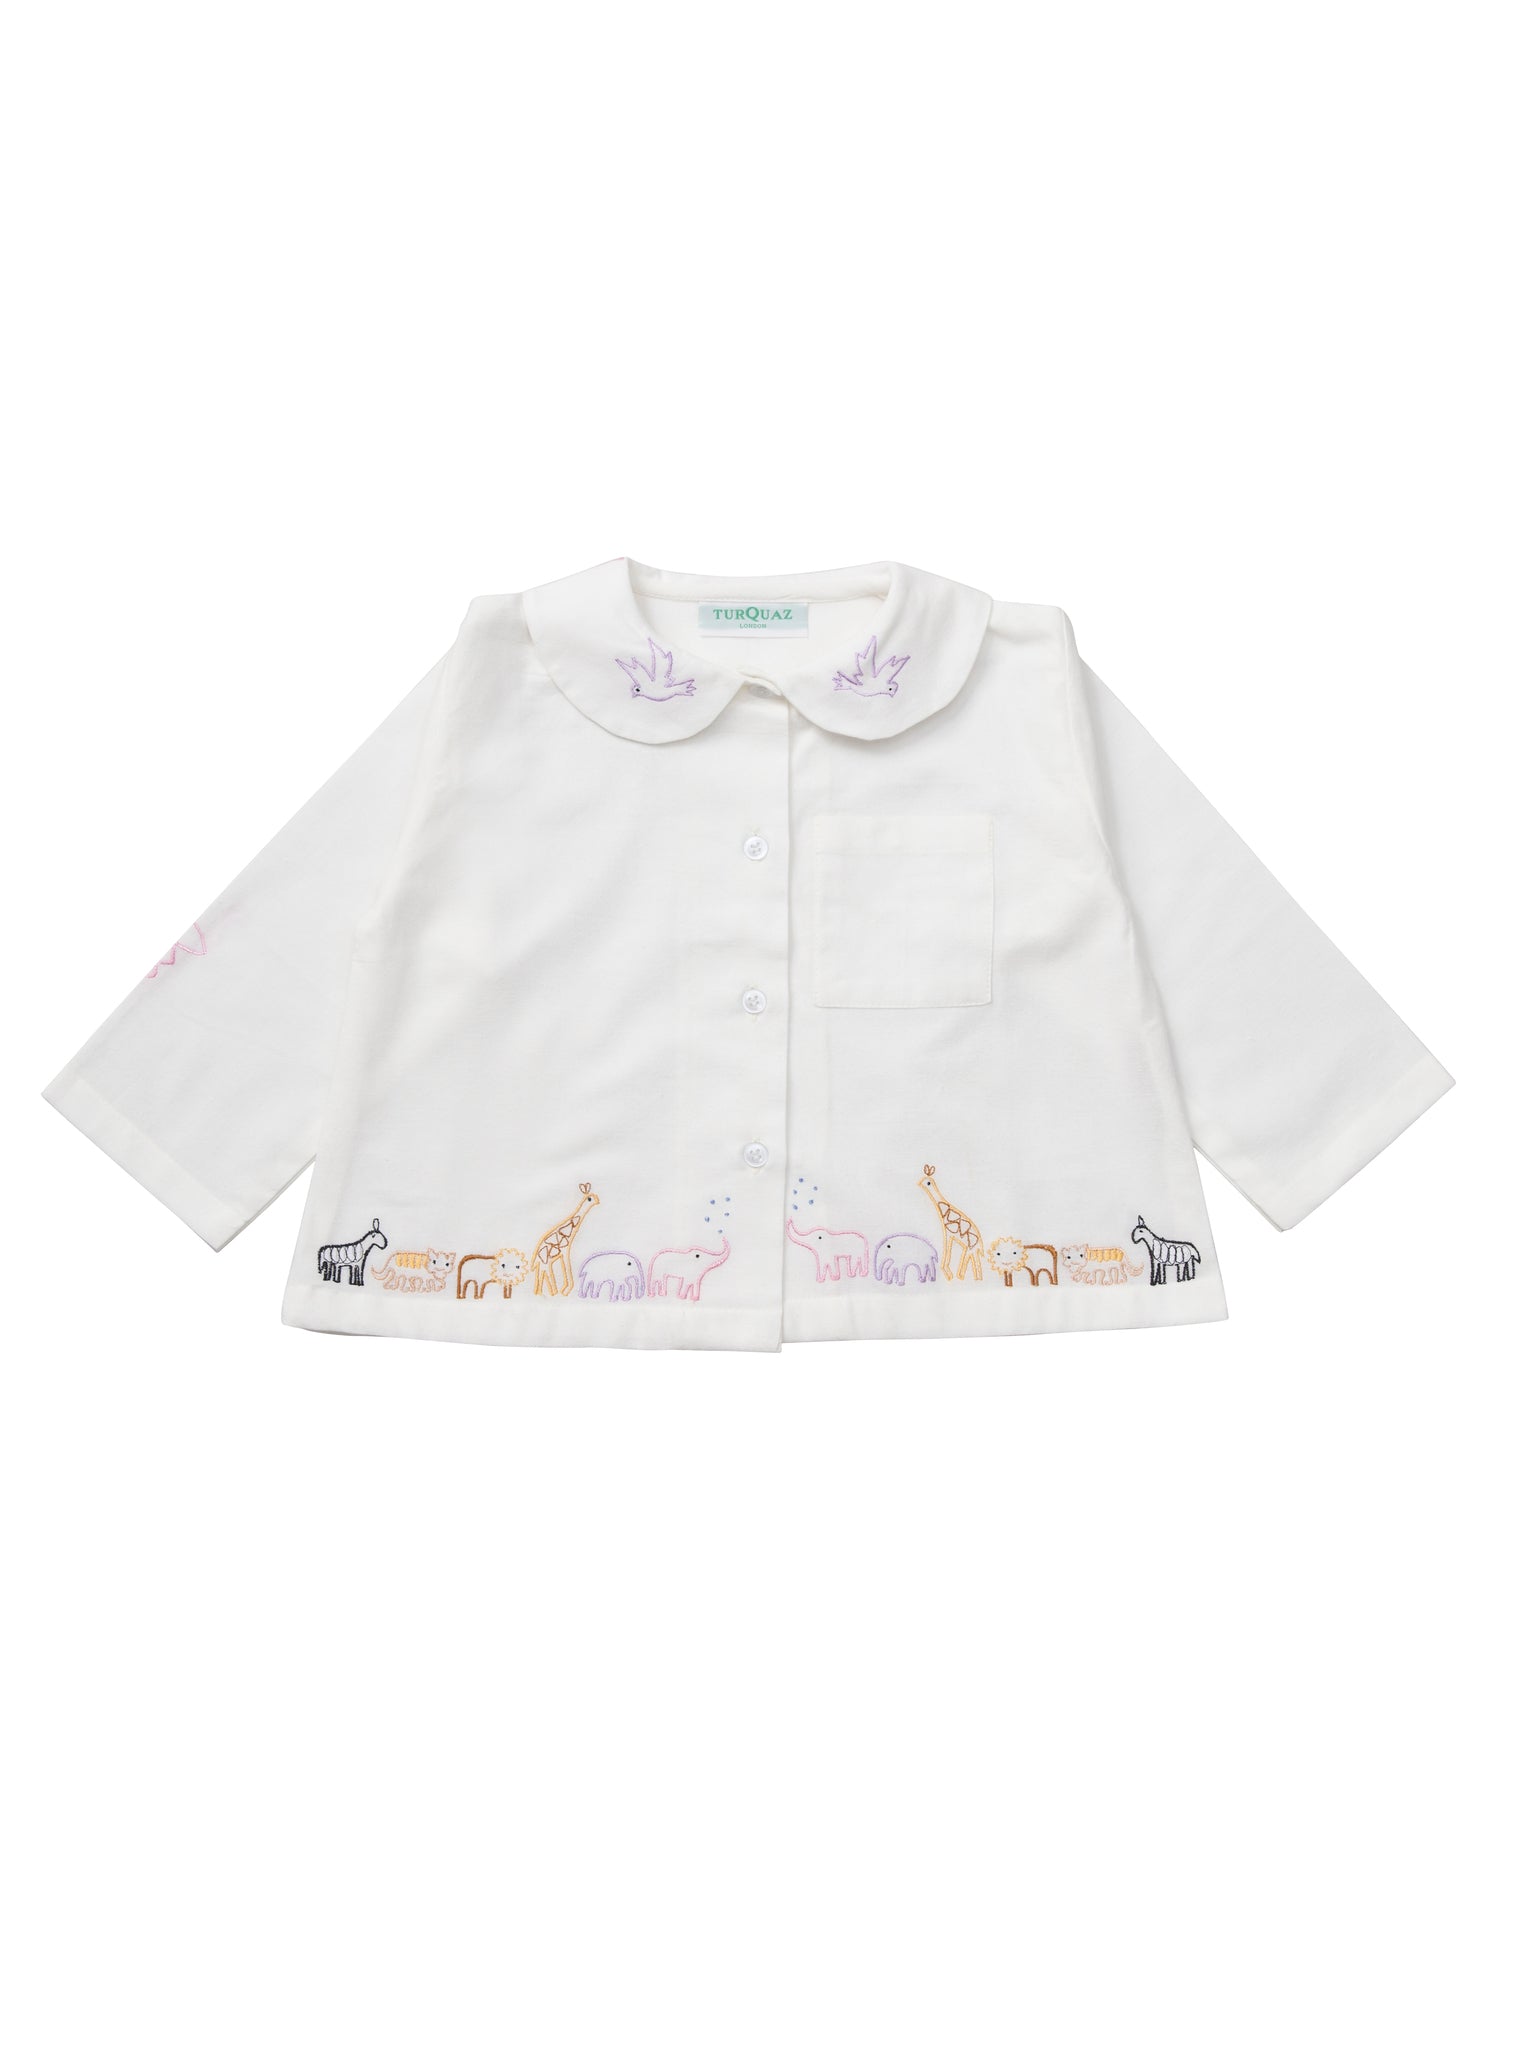 Traditionally styled white pyjamas, made in soft, brushed cotton. The top has lovely colourful animal embroidery, a peter pan collar, chest pocket and fastens with buttons on the front. The matching trousers have an elasticated waist and embroidery above the hem of the legs.